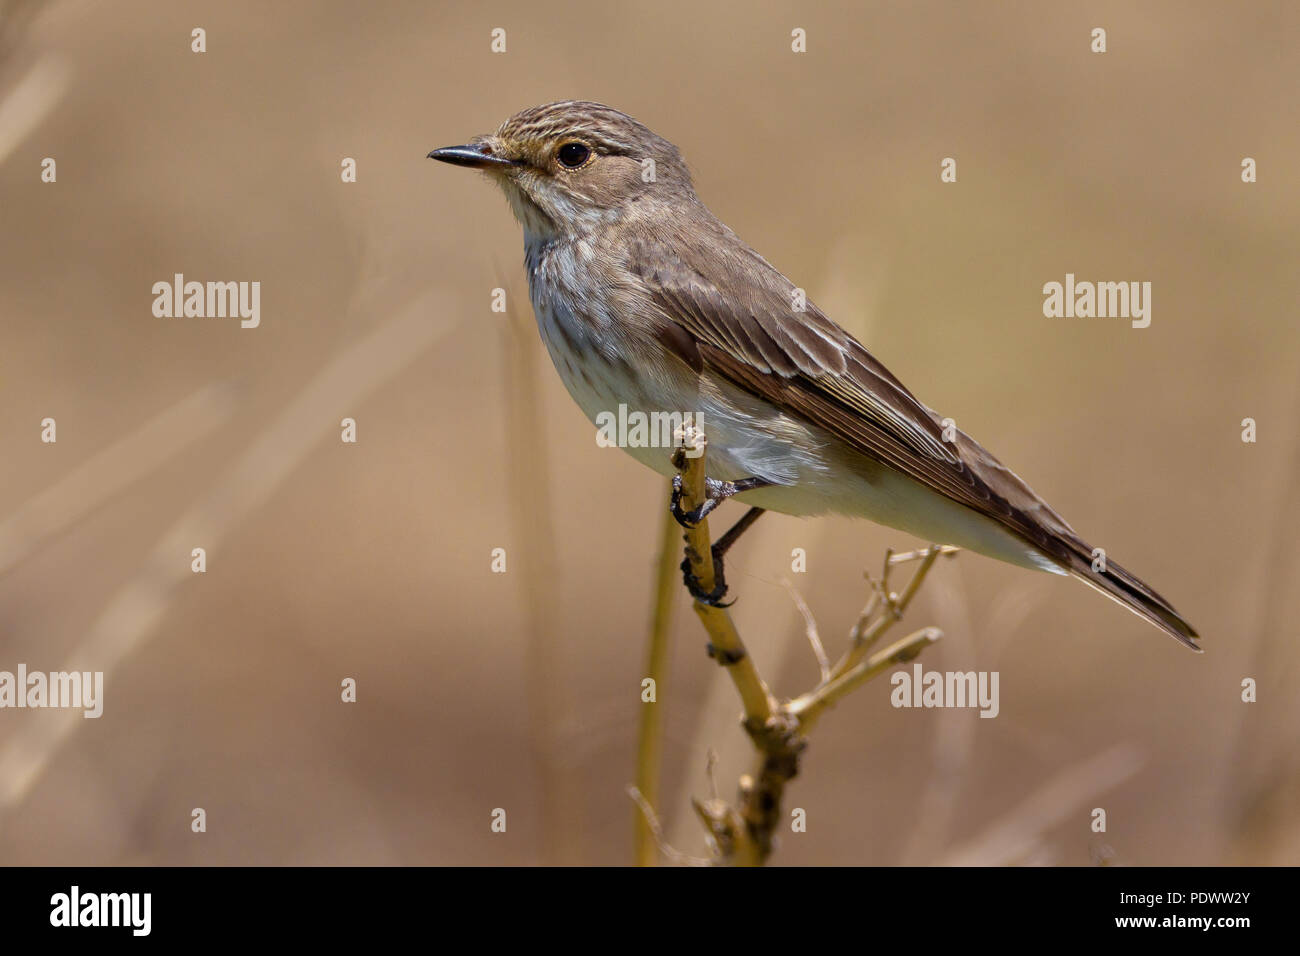 Spotted Flycatcher on twig Banque D'Images